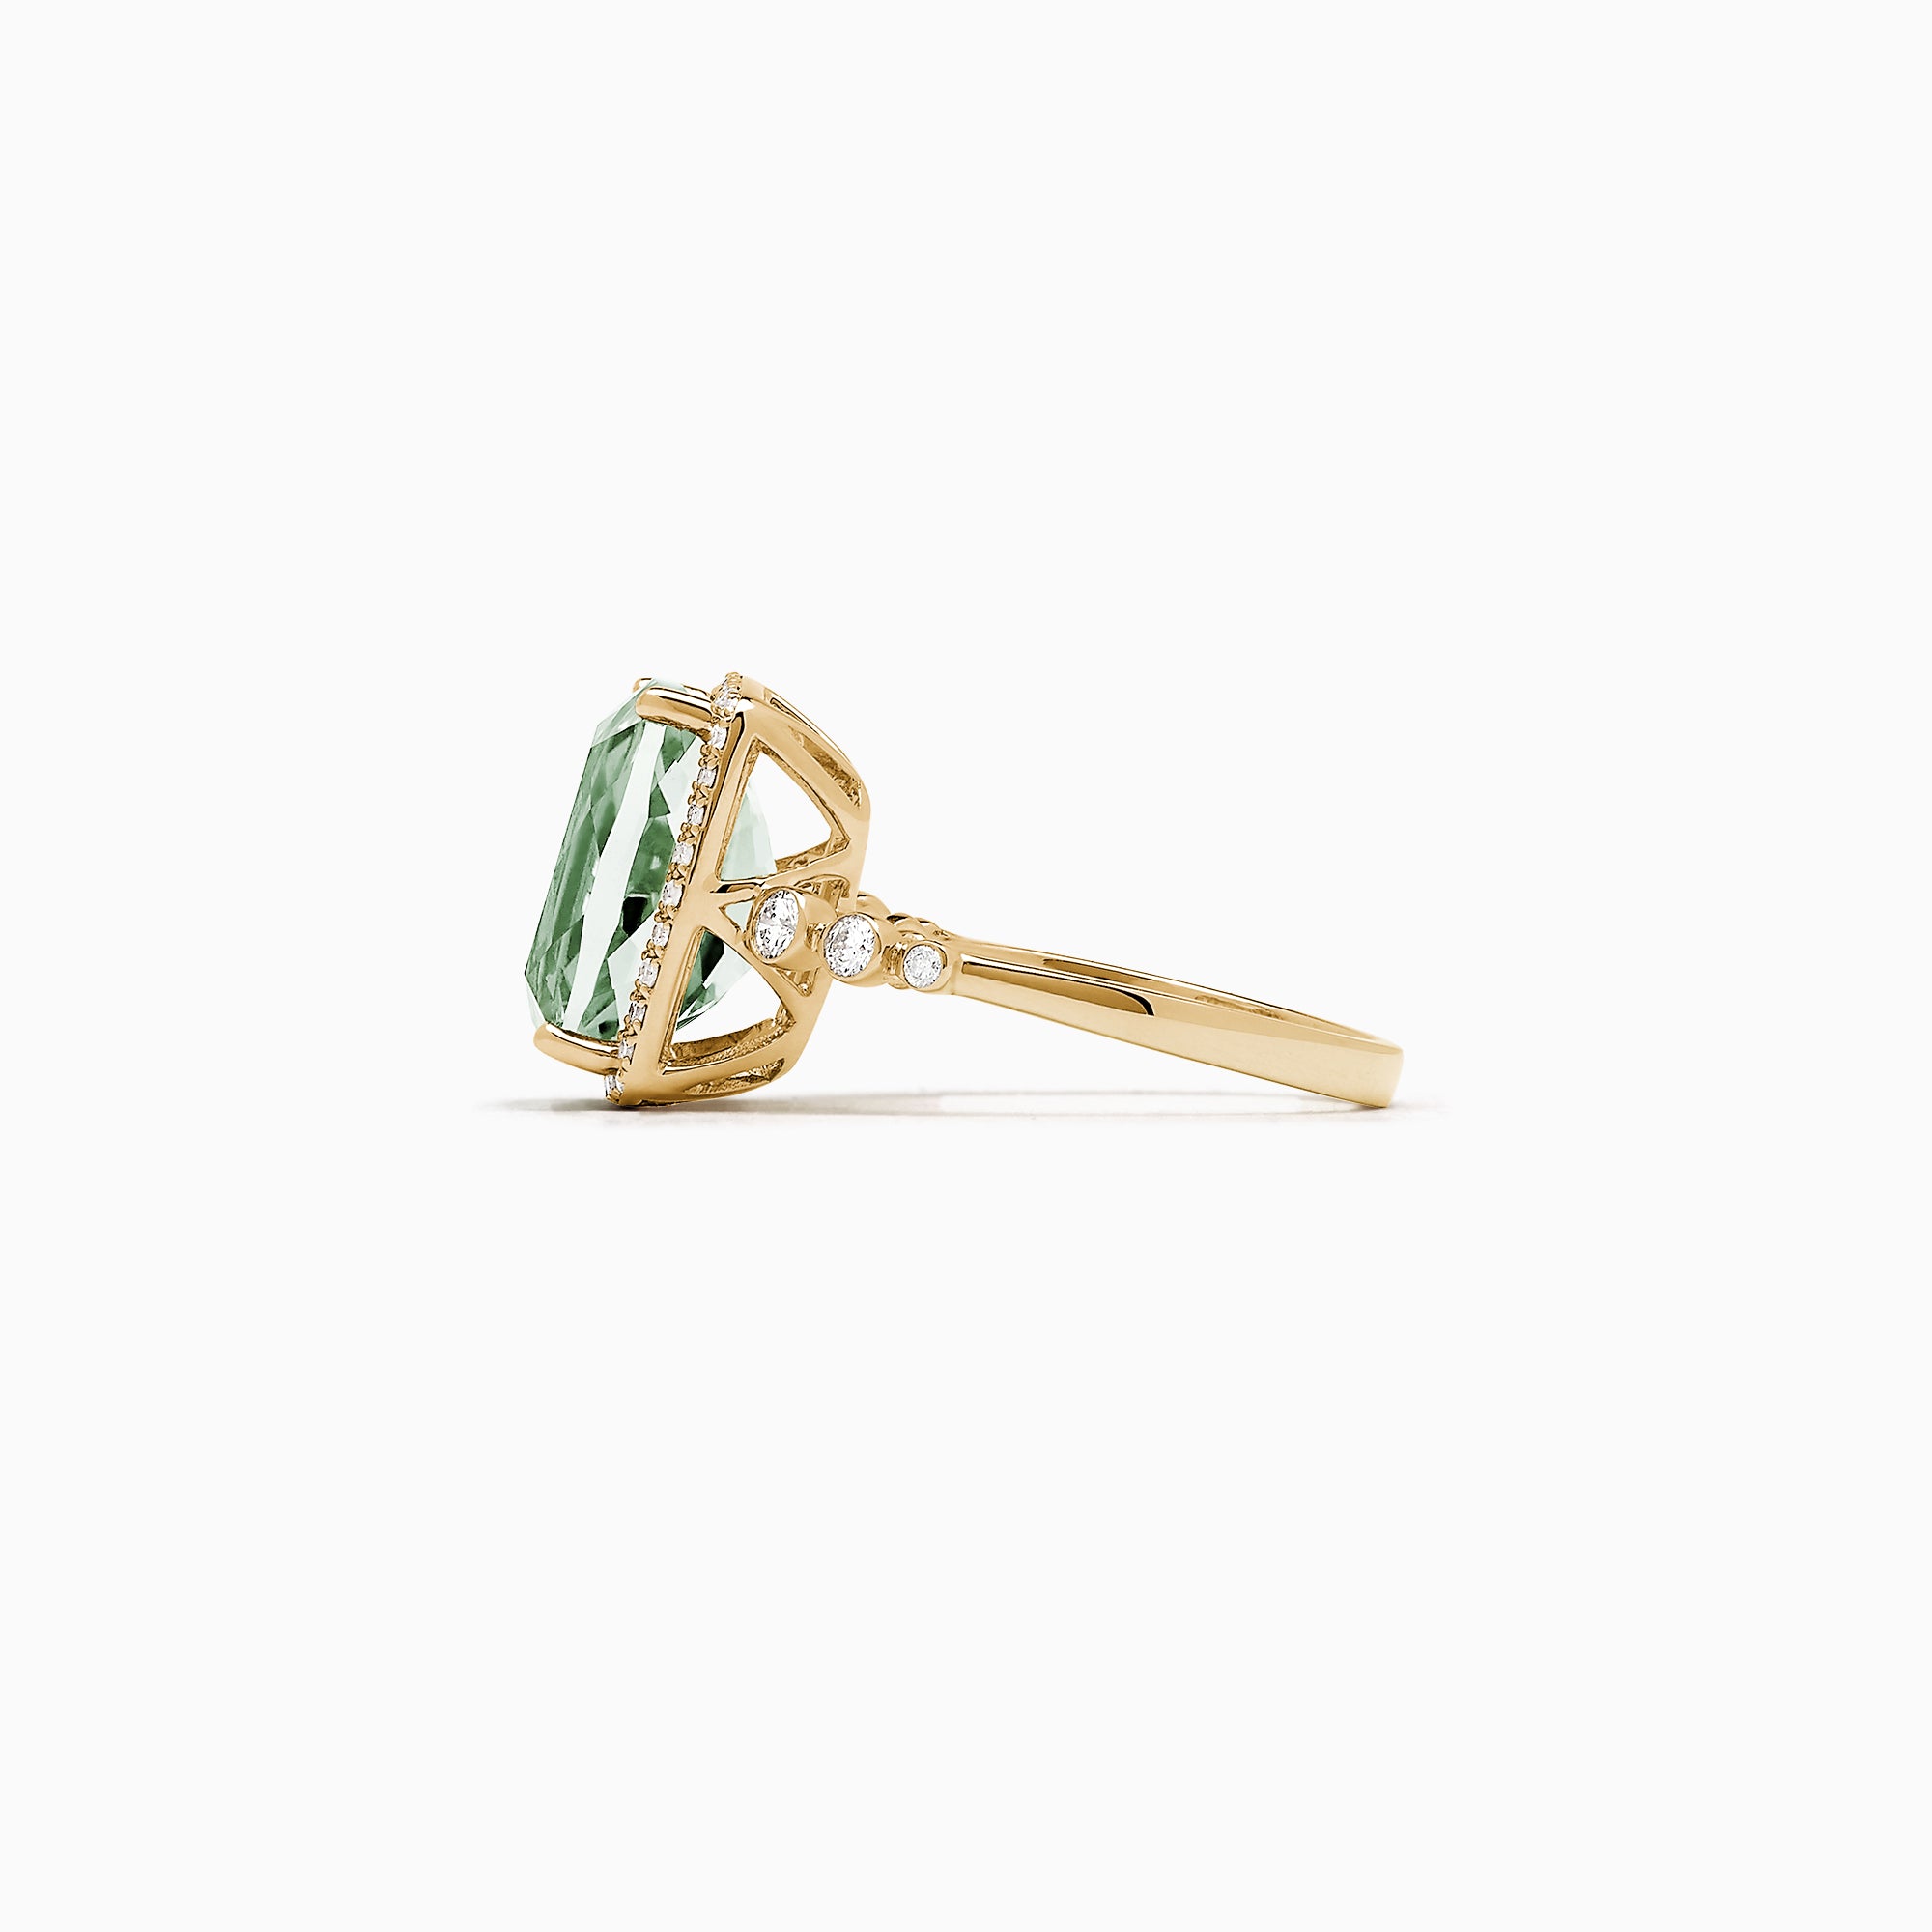 Effy 14K Yellow Gold Green Amethyst and Diamond Cocktail Ring, 6.95 TCW